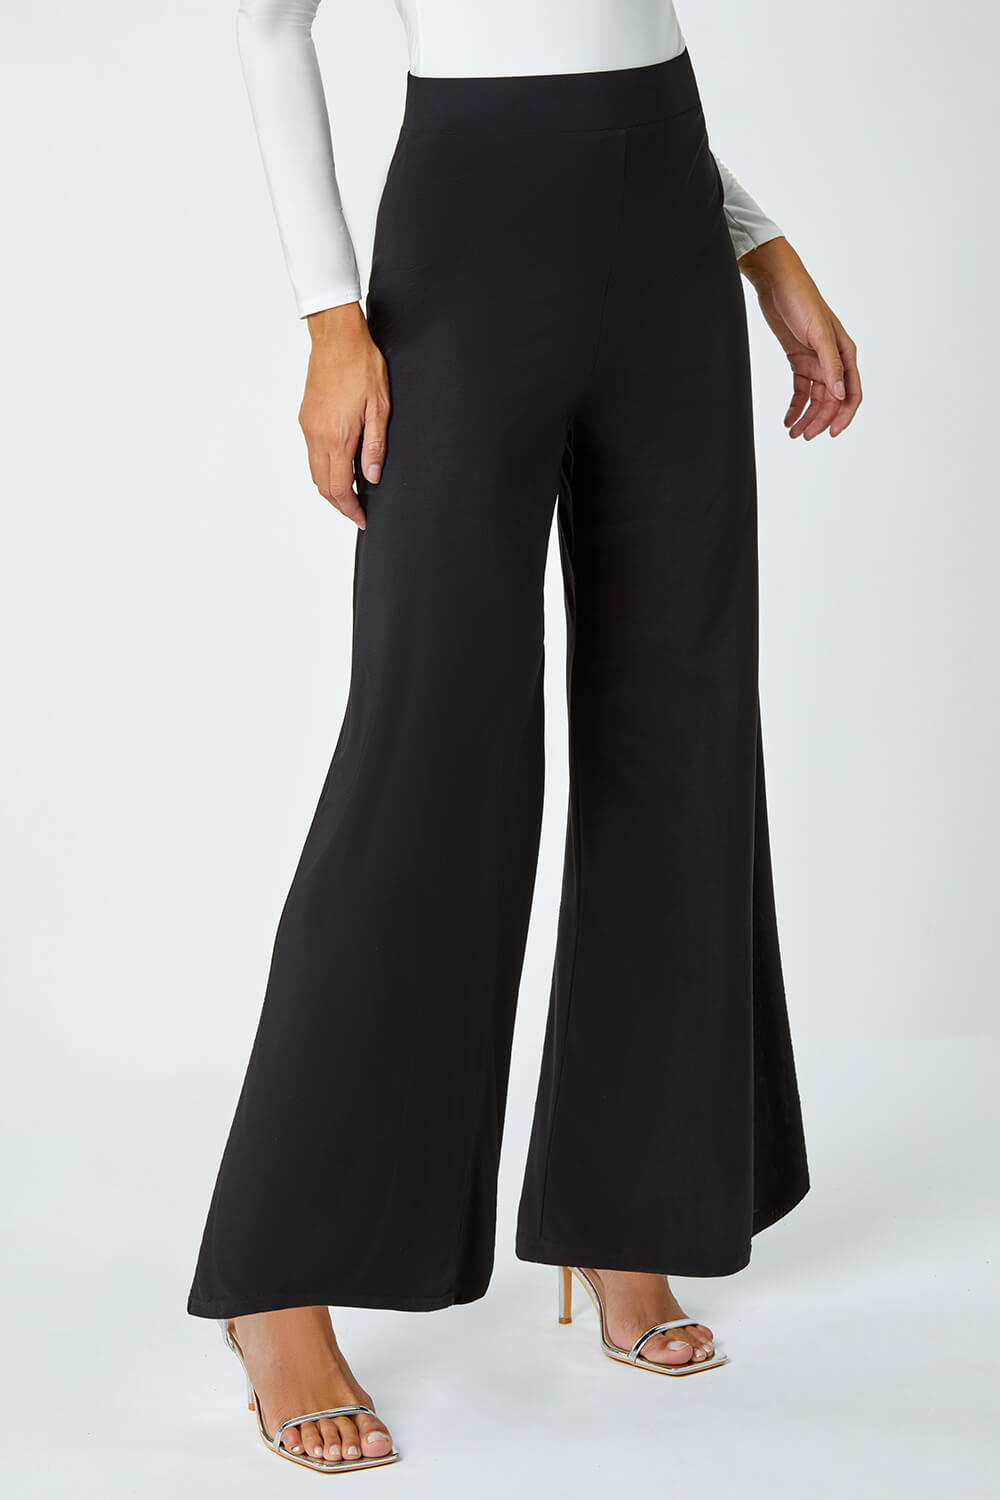 Black Wide Leg Stretch Trousers, Image 4 of 6